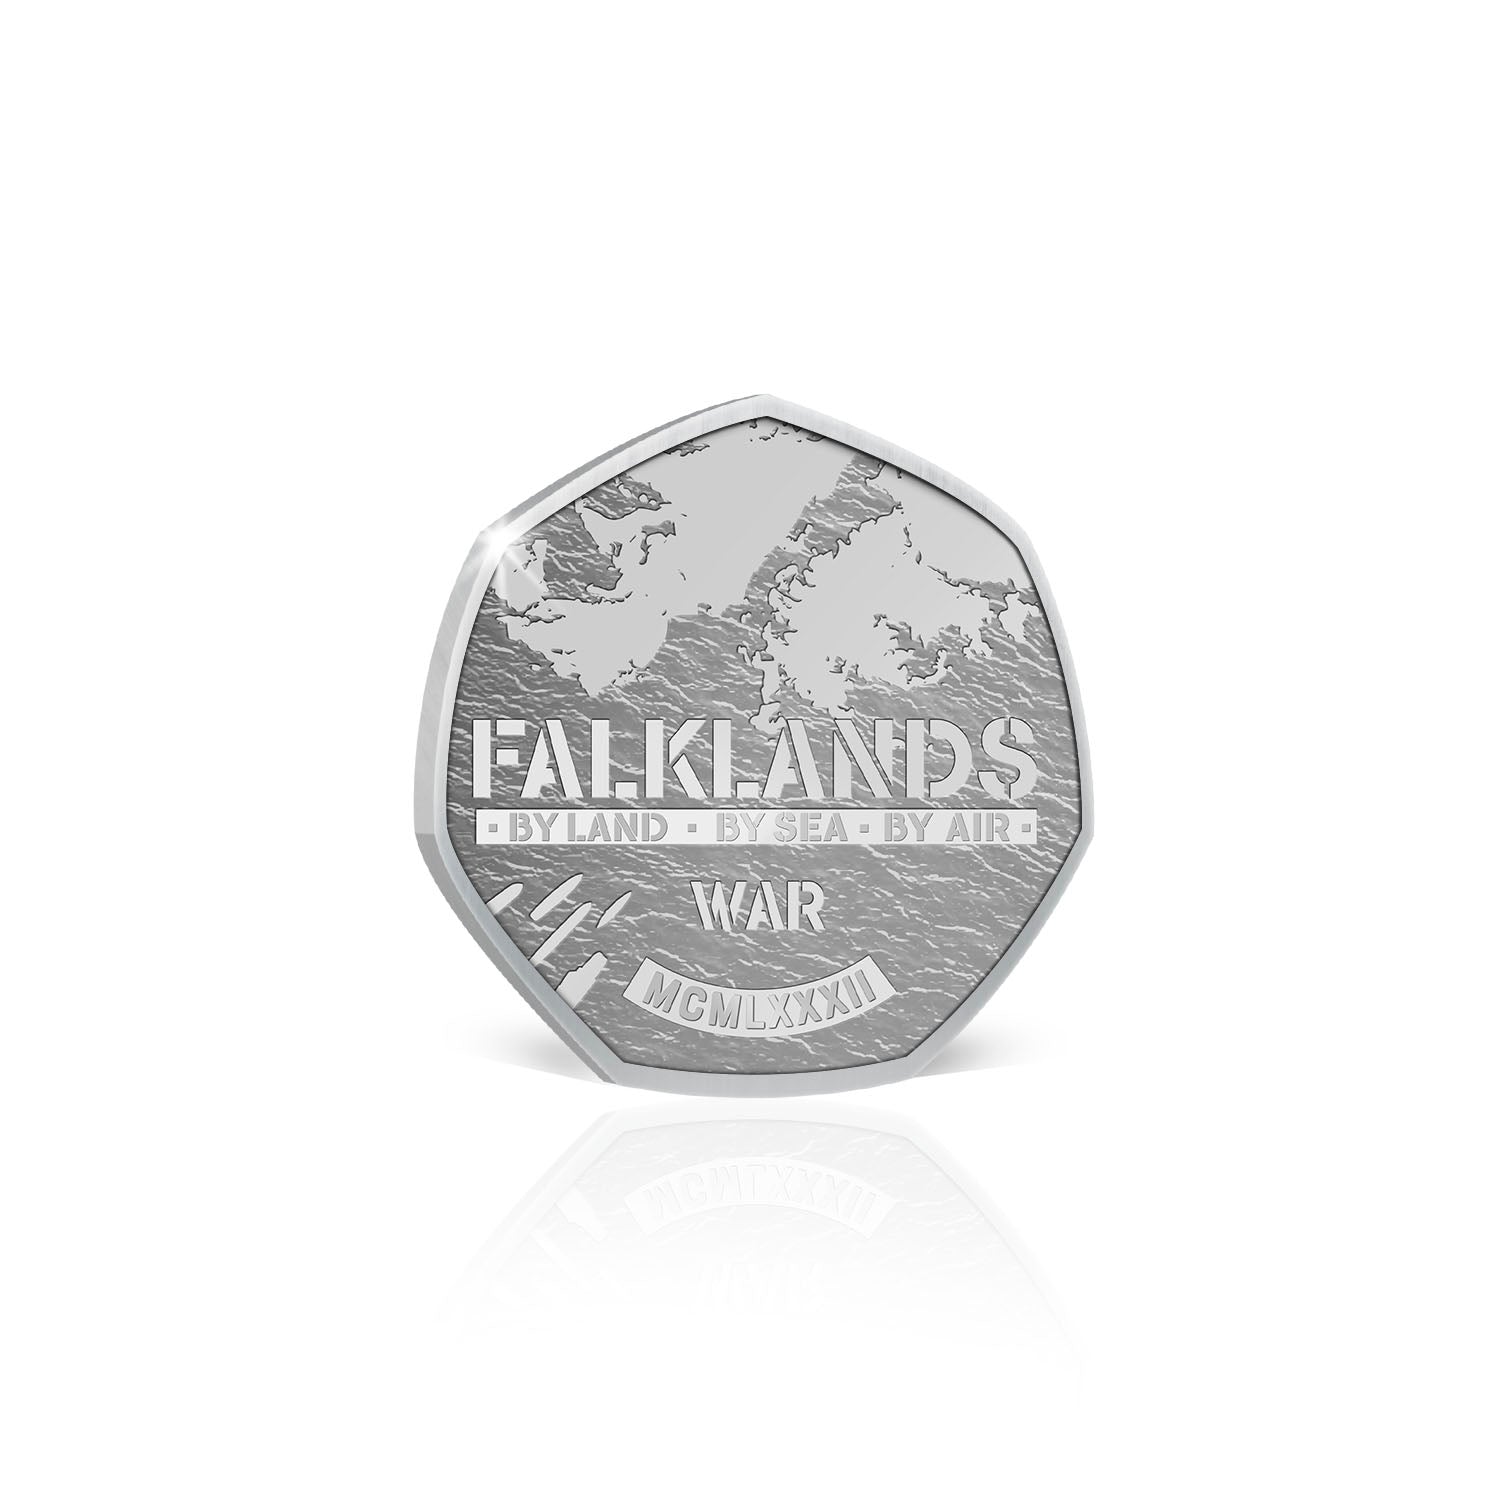 Mount Kent in Coin Holder